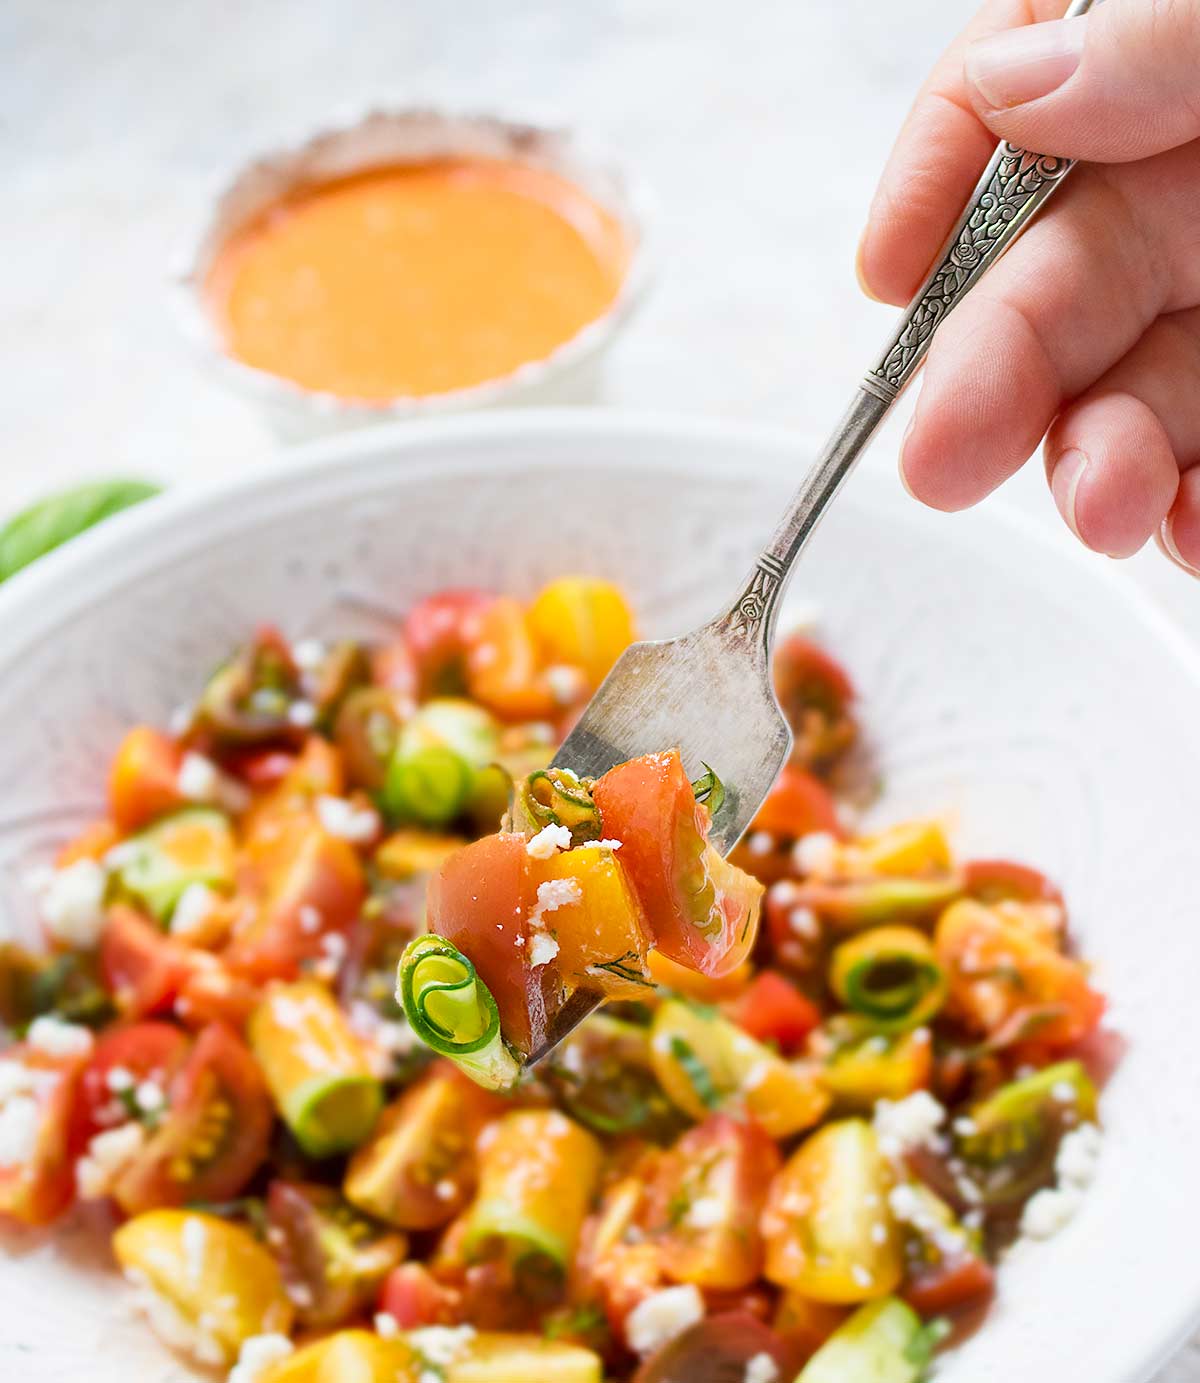 A forkful of tomato lover's tomato salad